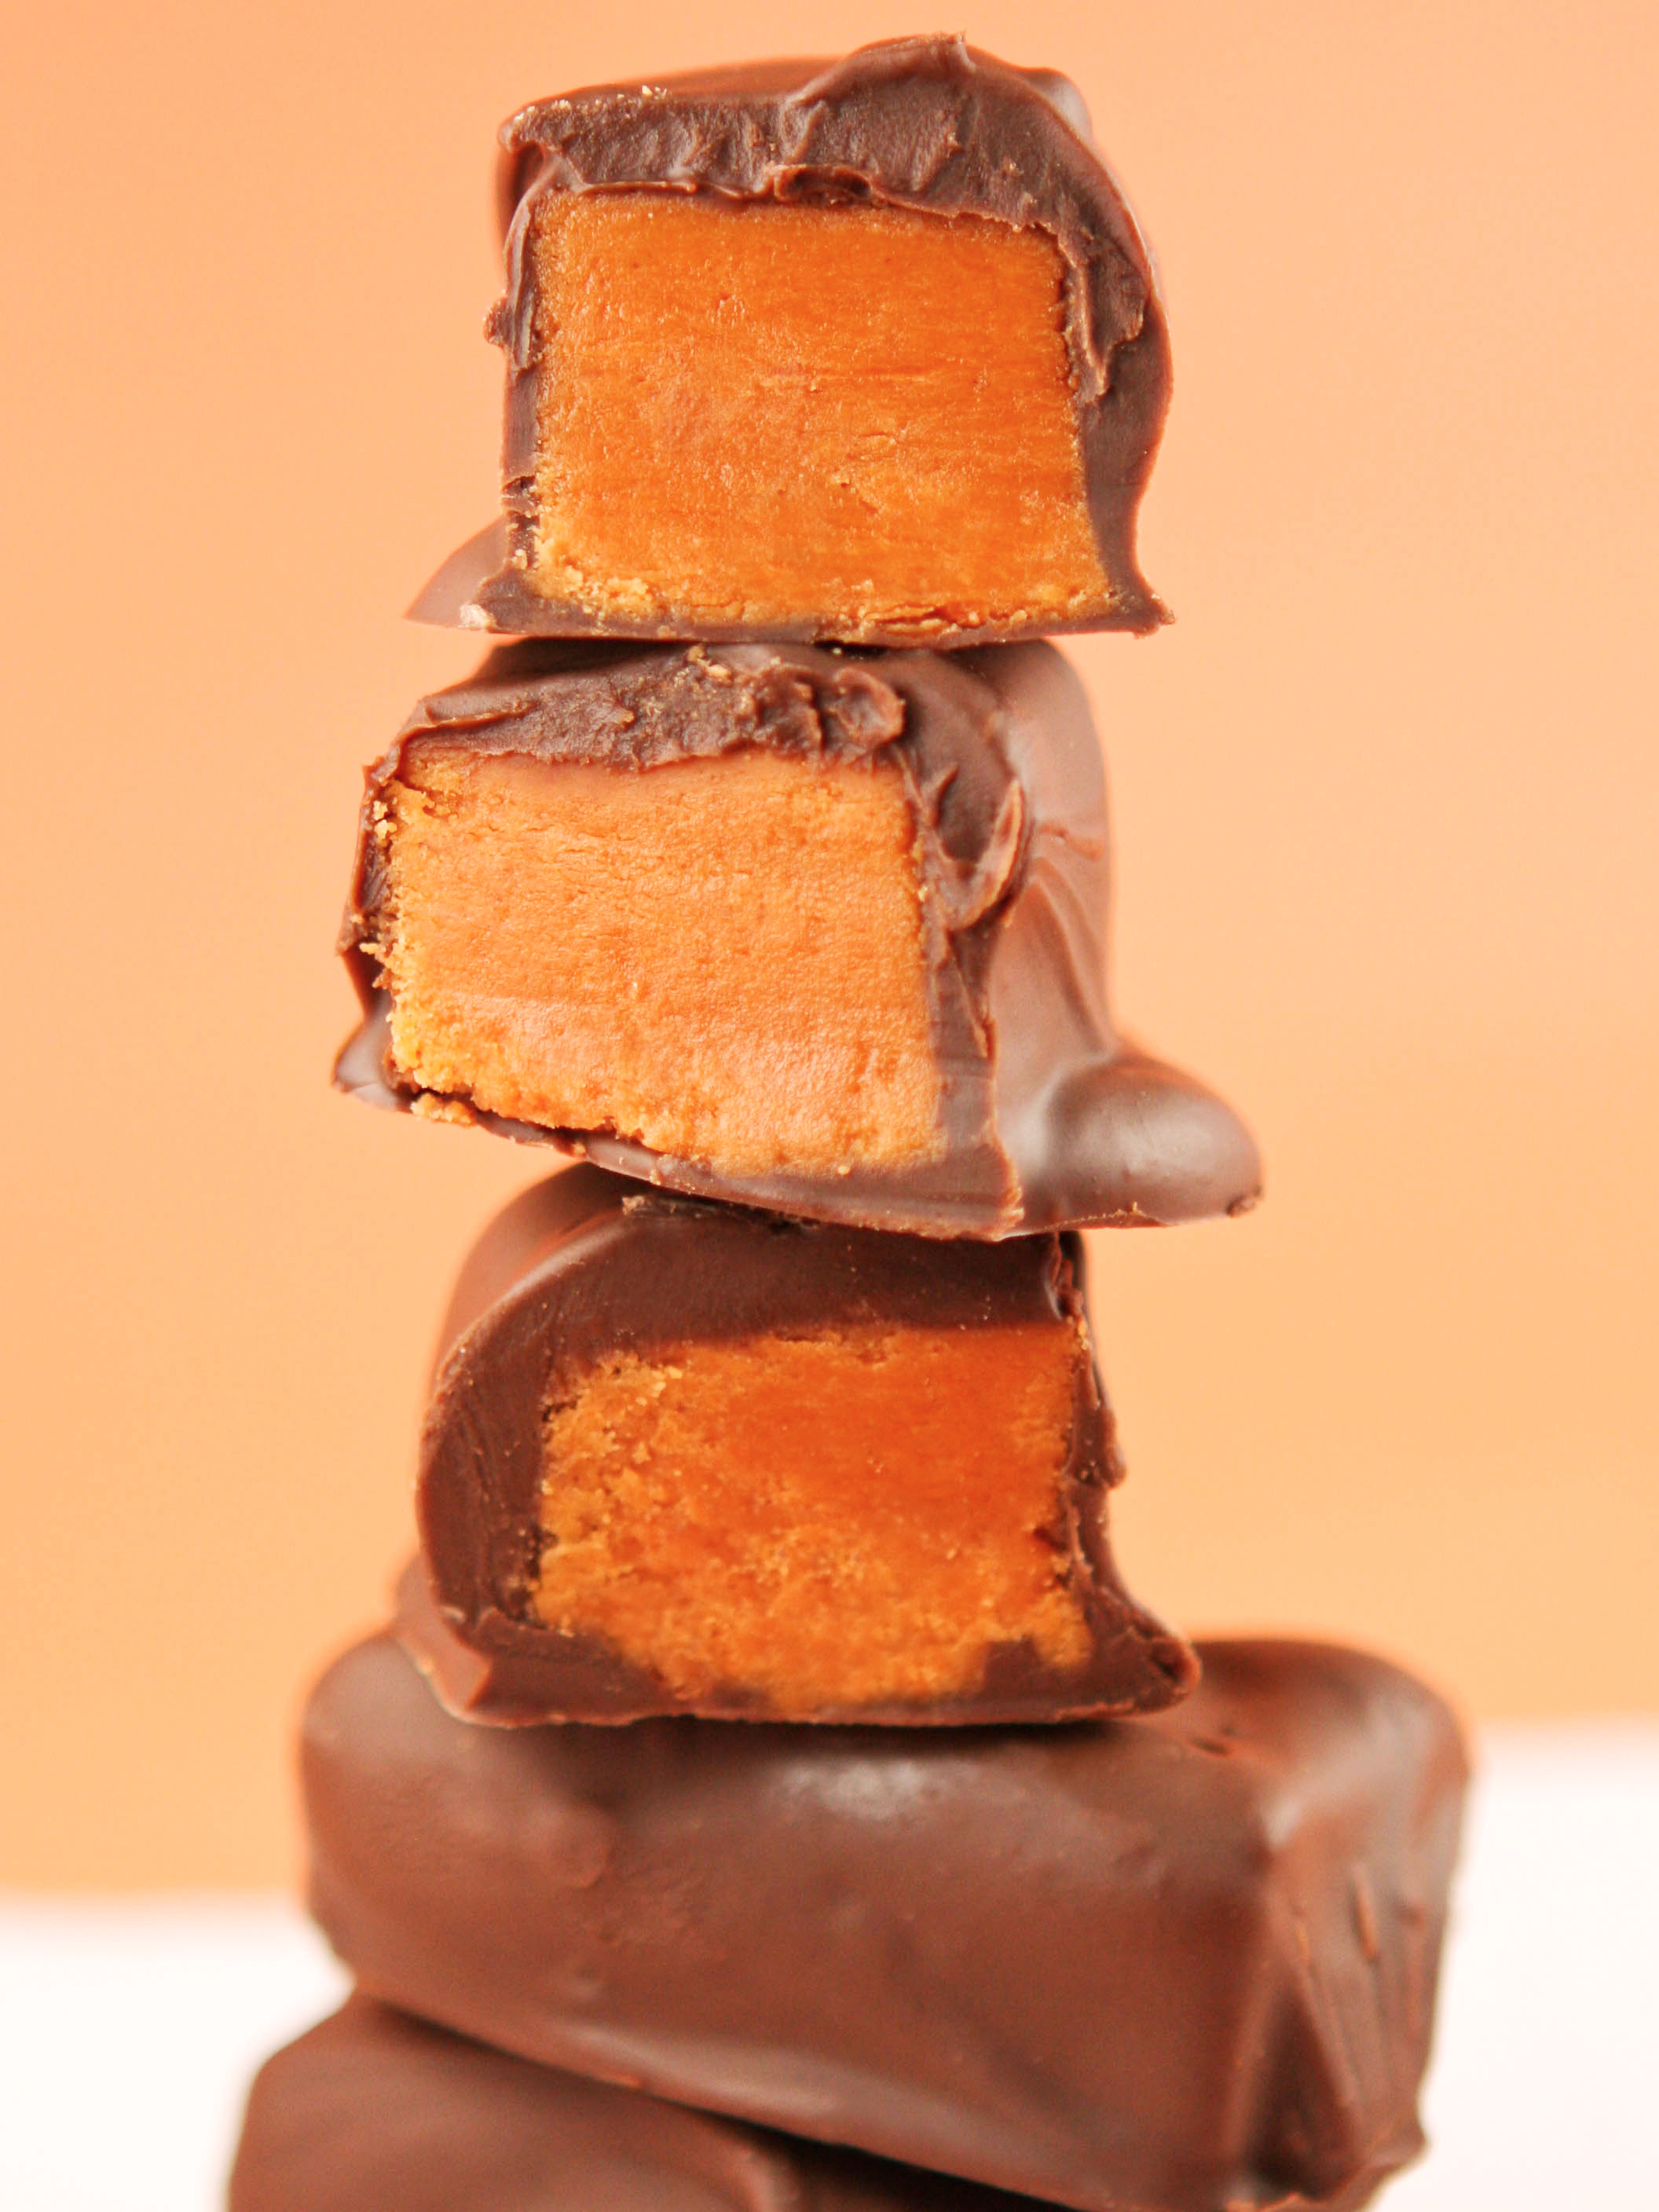 Three butterfinger candy bars cut in half stacked on top of each other